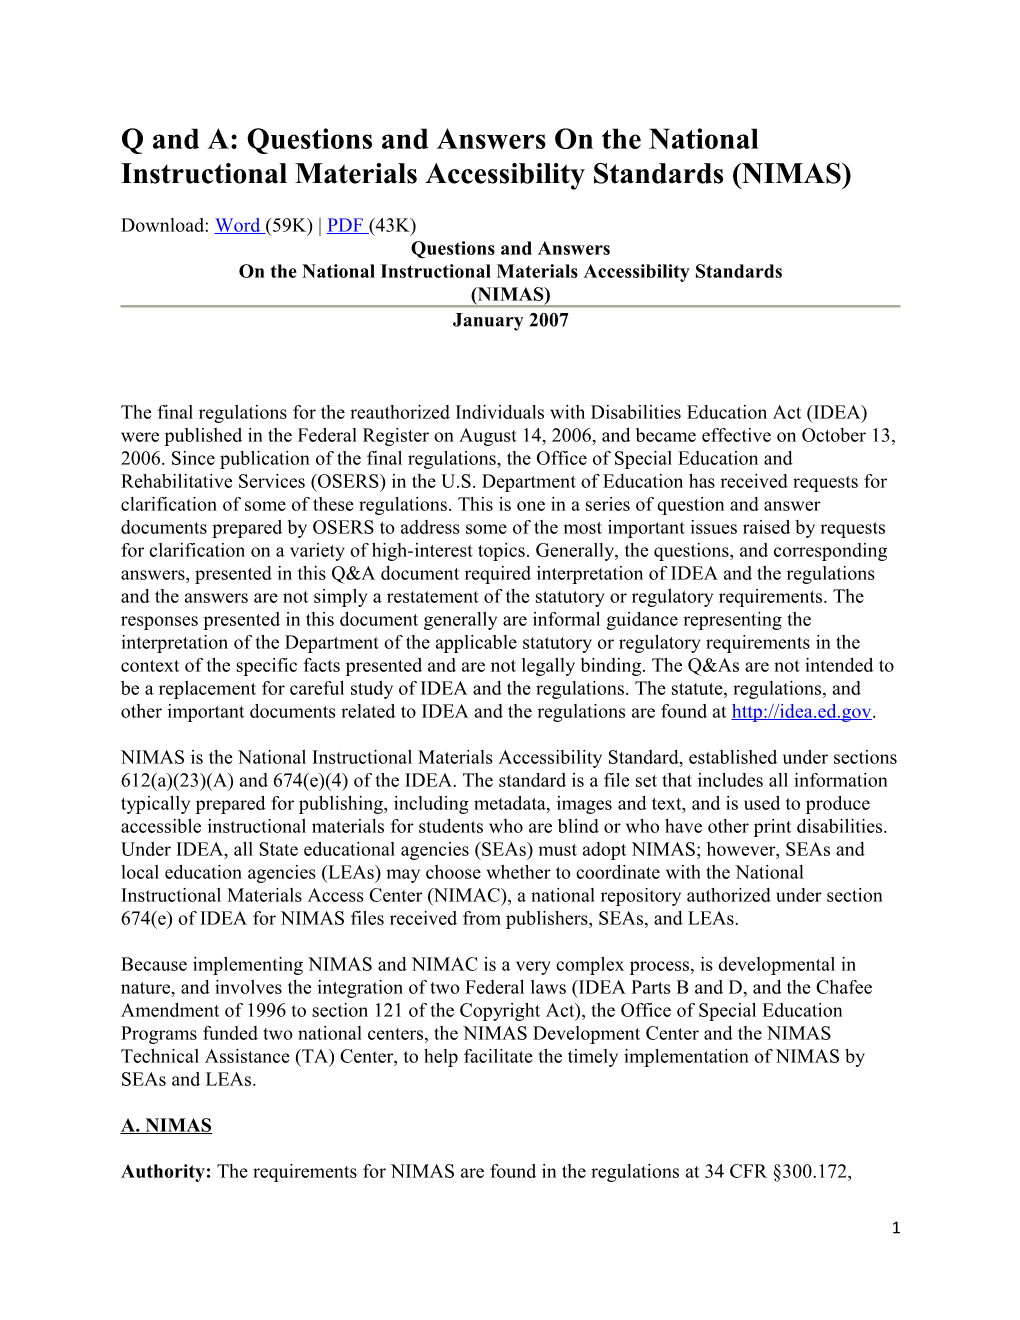 Q and A: Questions and Answers on the National Instructional Materials Accessibility Standards